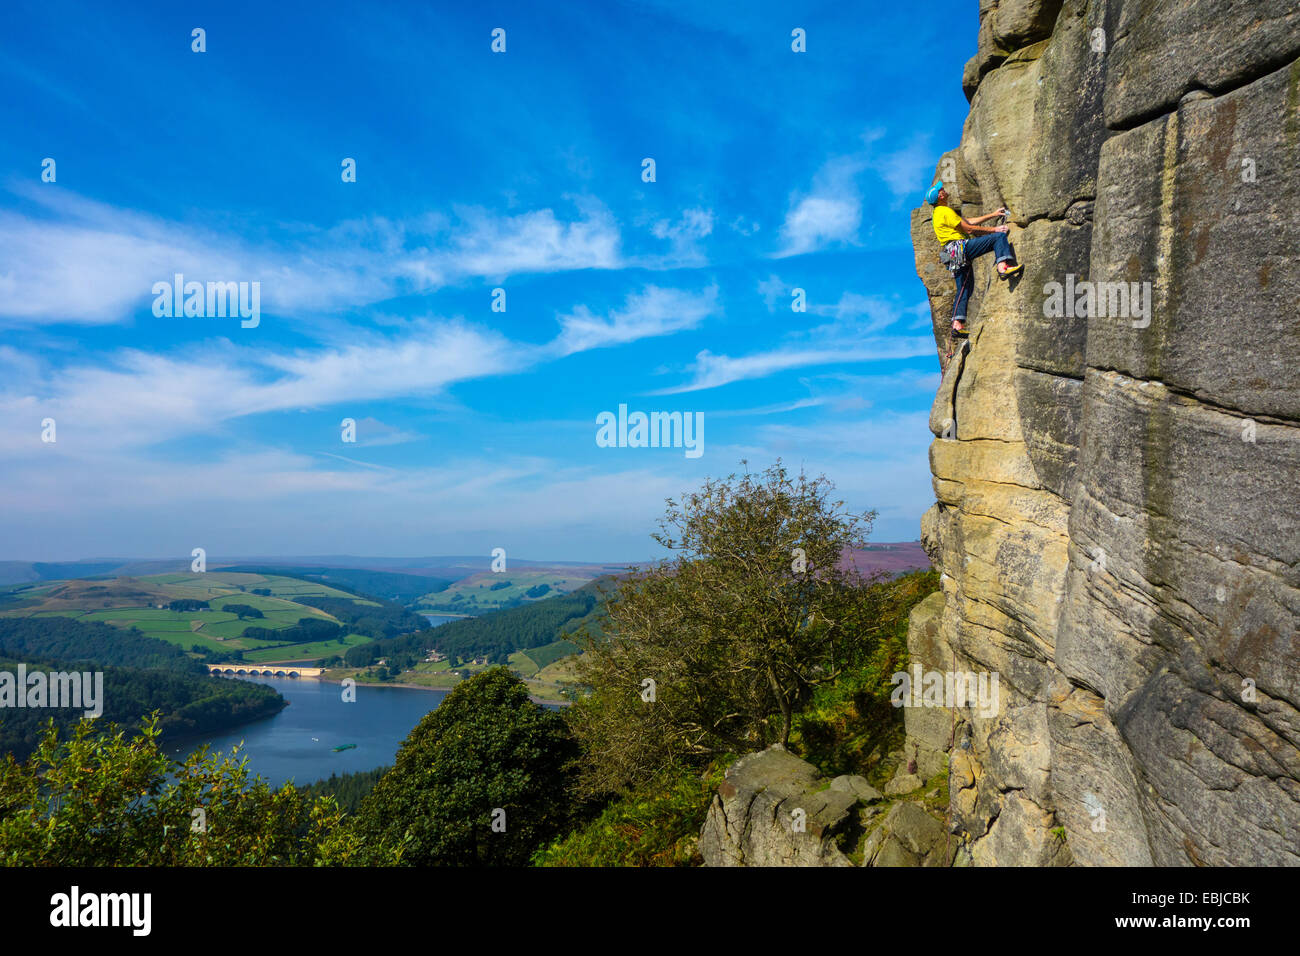 Rock climber in yellow on Bamford Edge, Derbyshire, Peak District, with Ladybower Reservoir behind Stock Photo